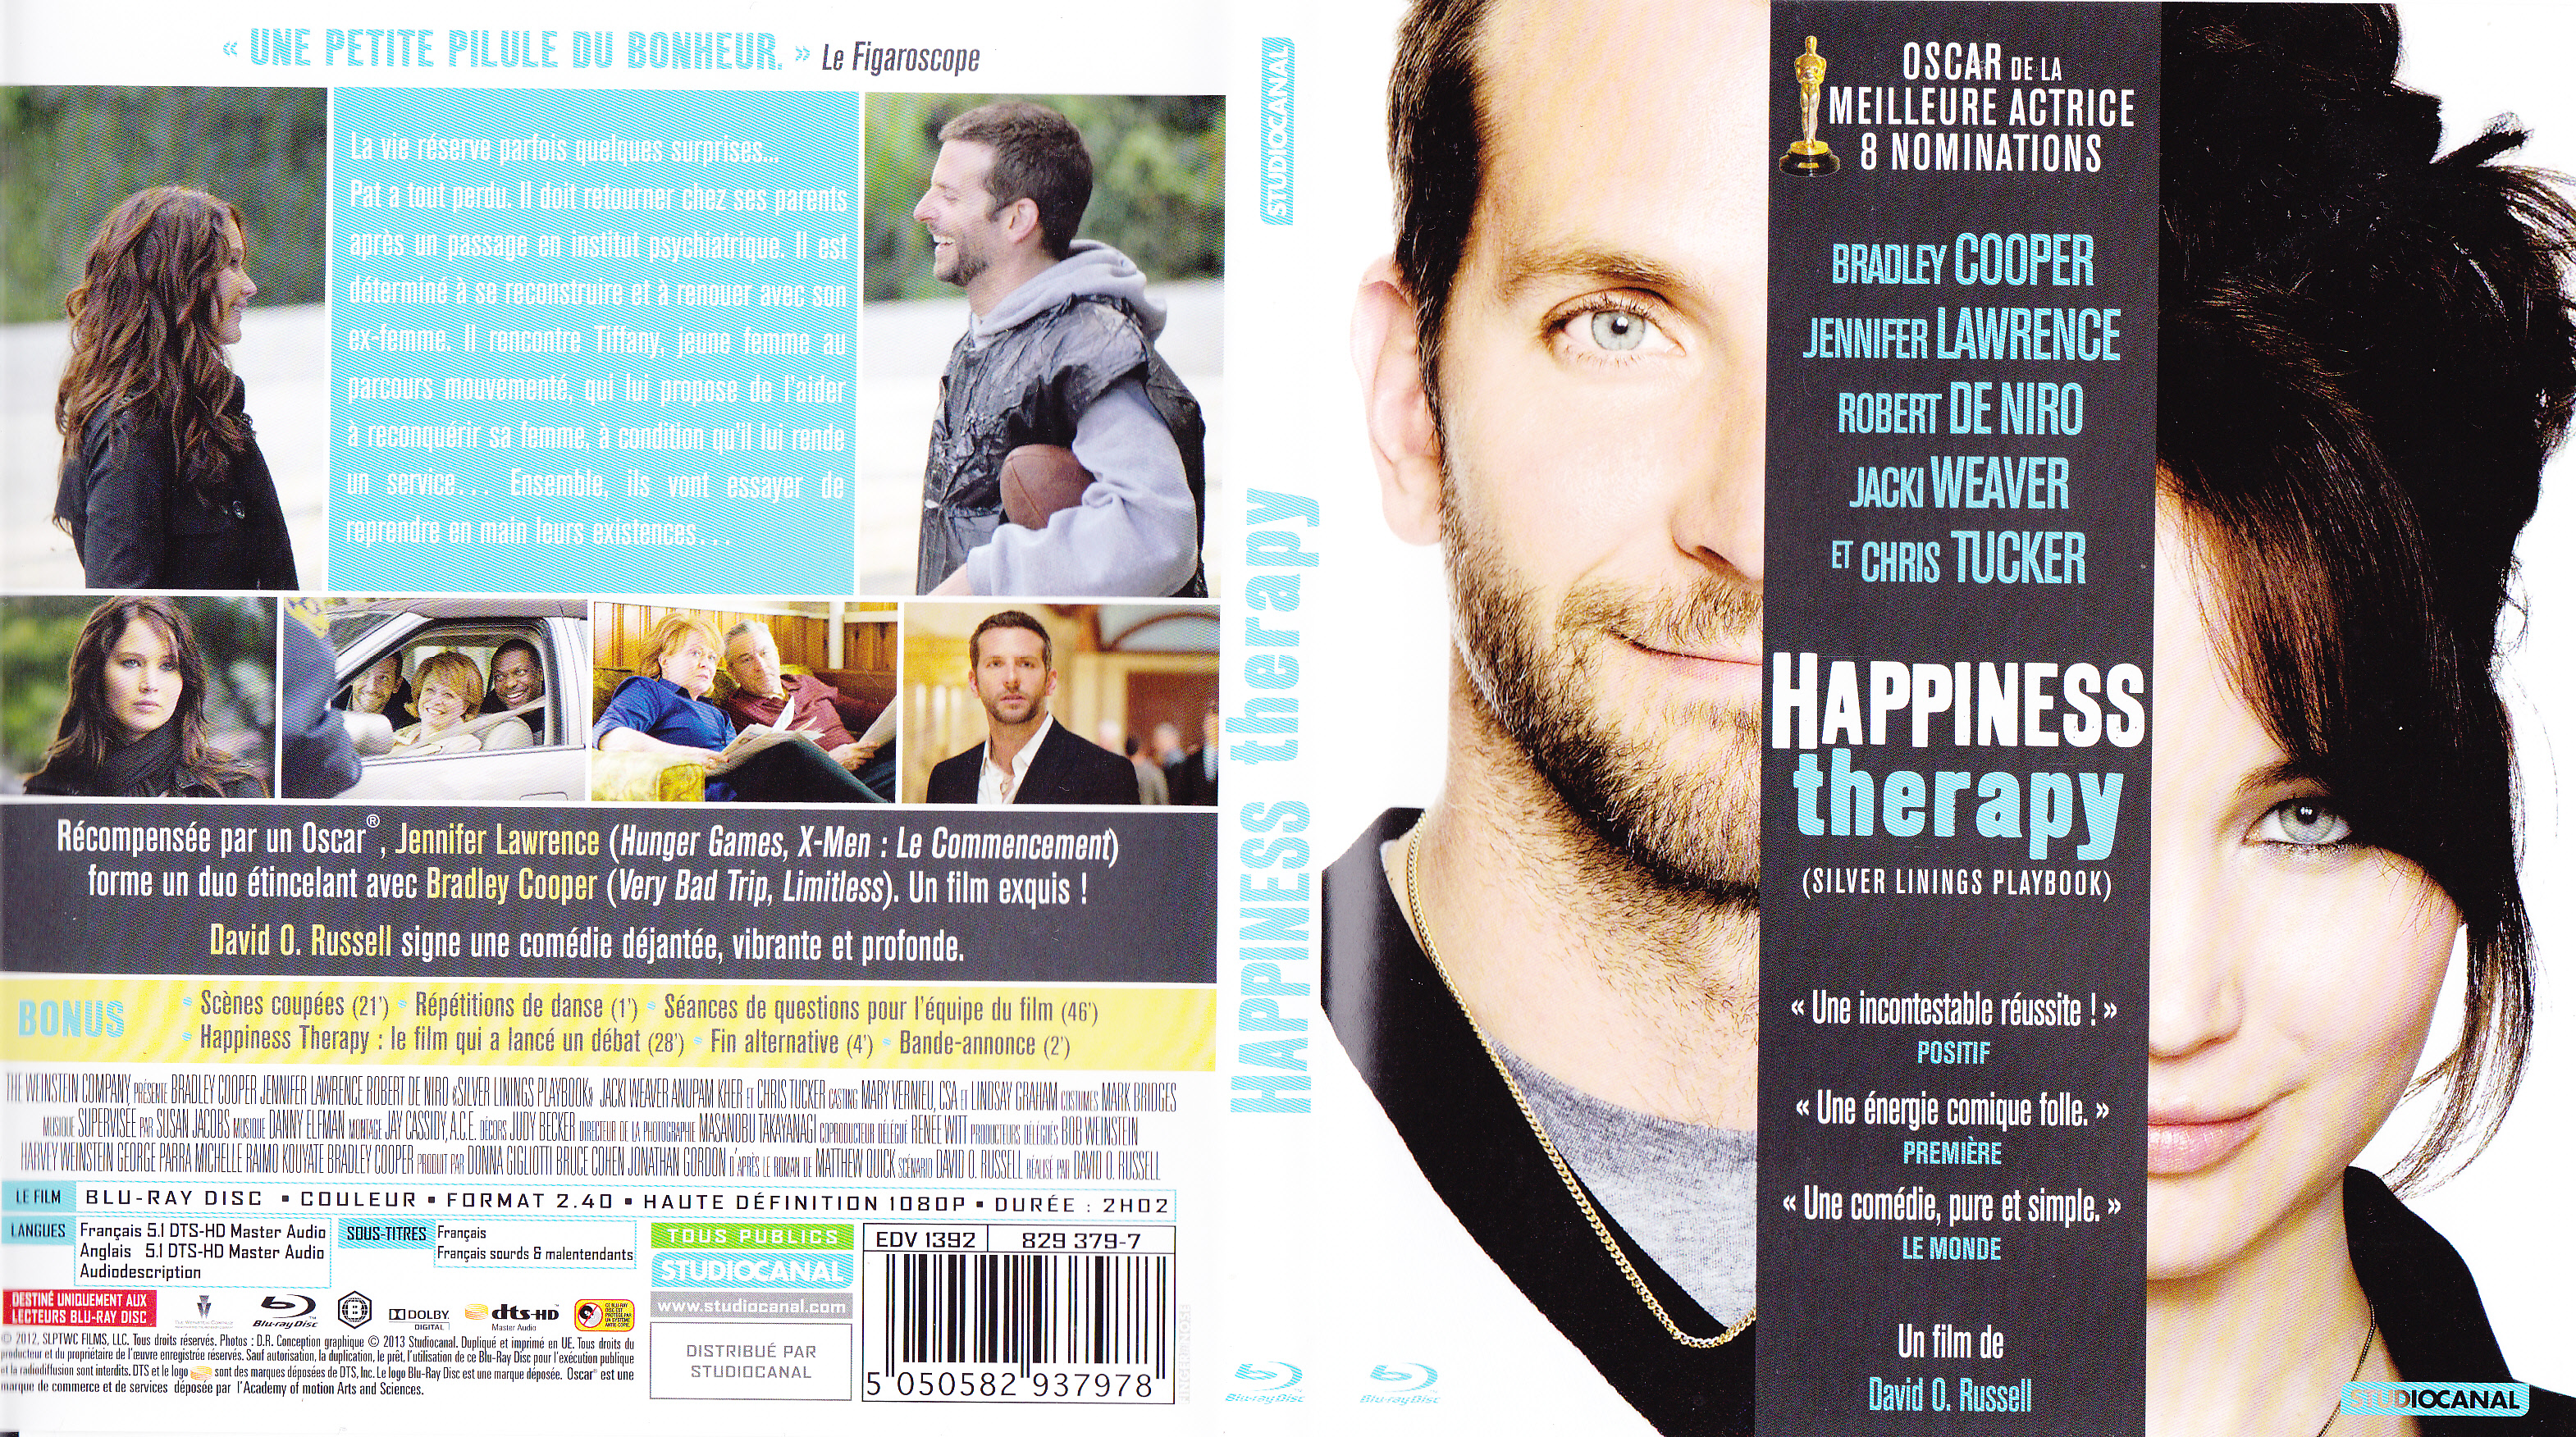 Jaquette DVD Happiness Therapy (BLU-RAY)